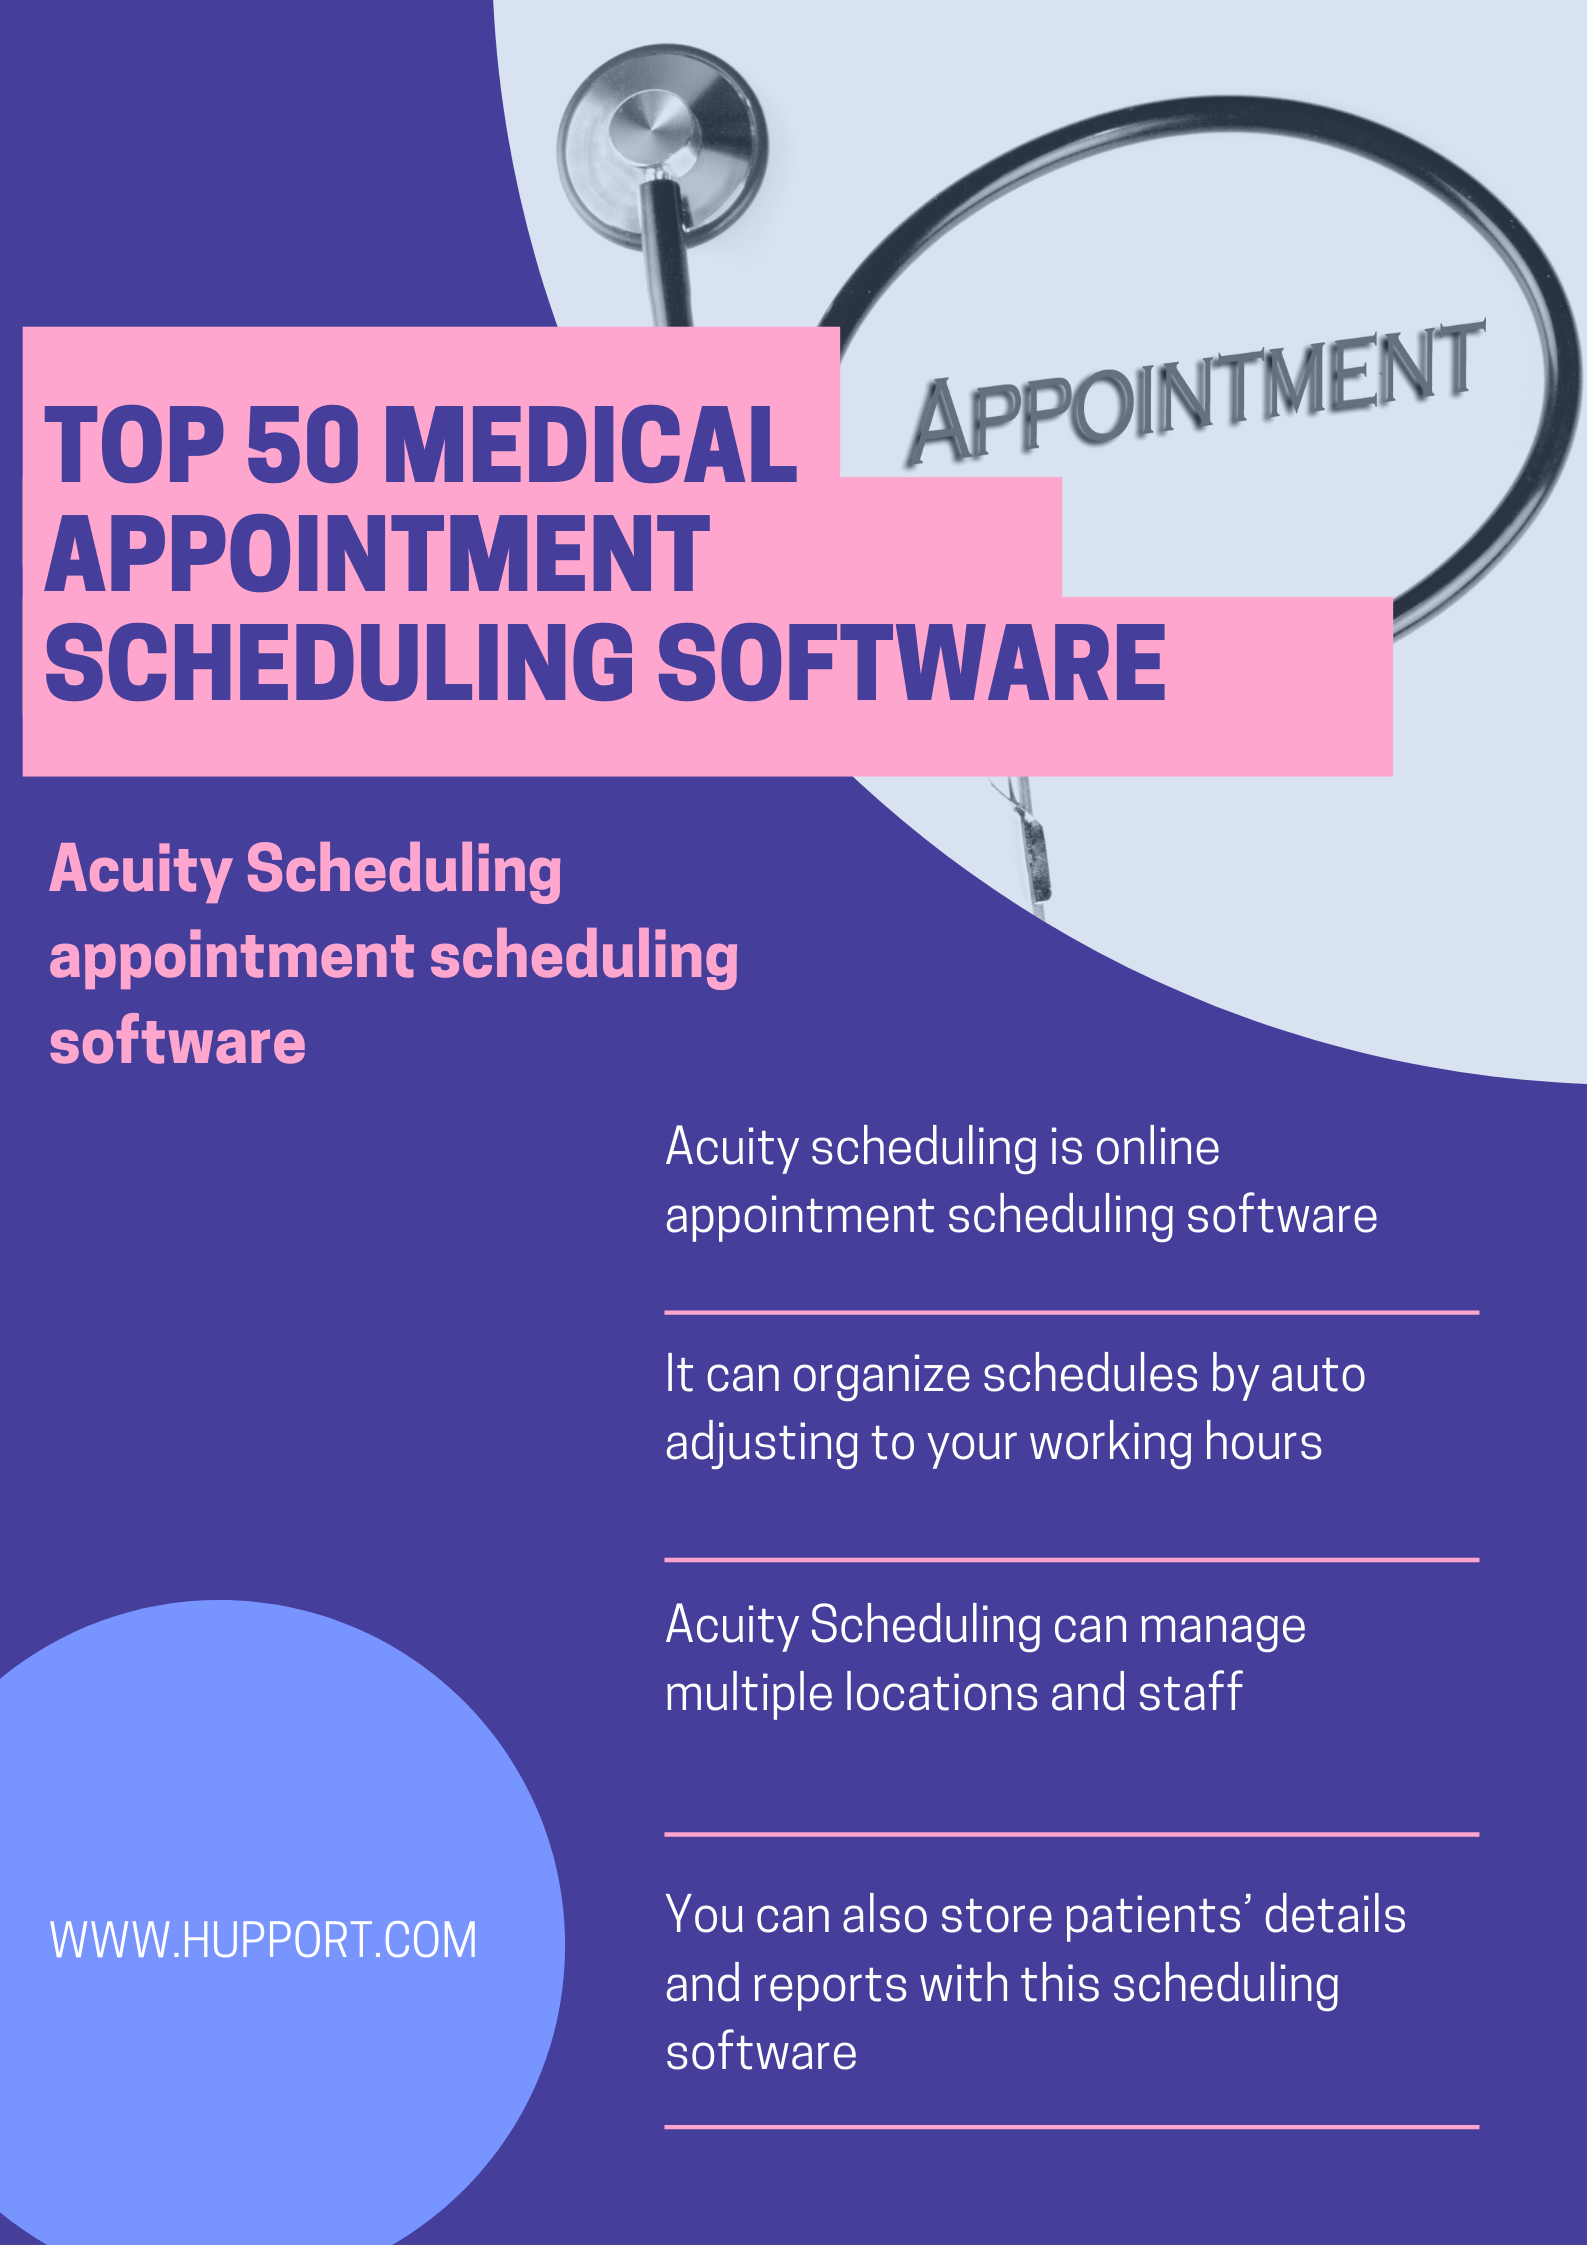 Acuity appointment scheduling software